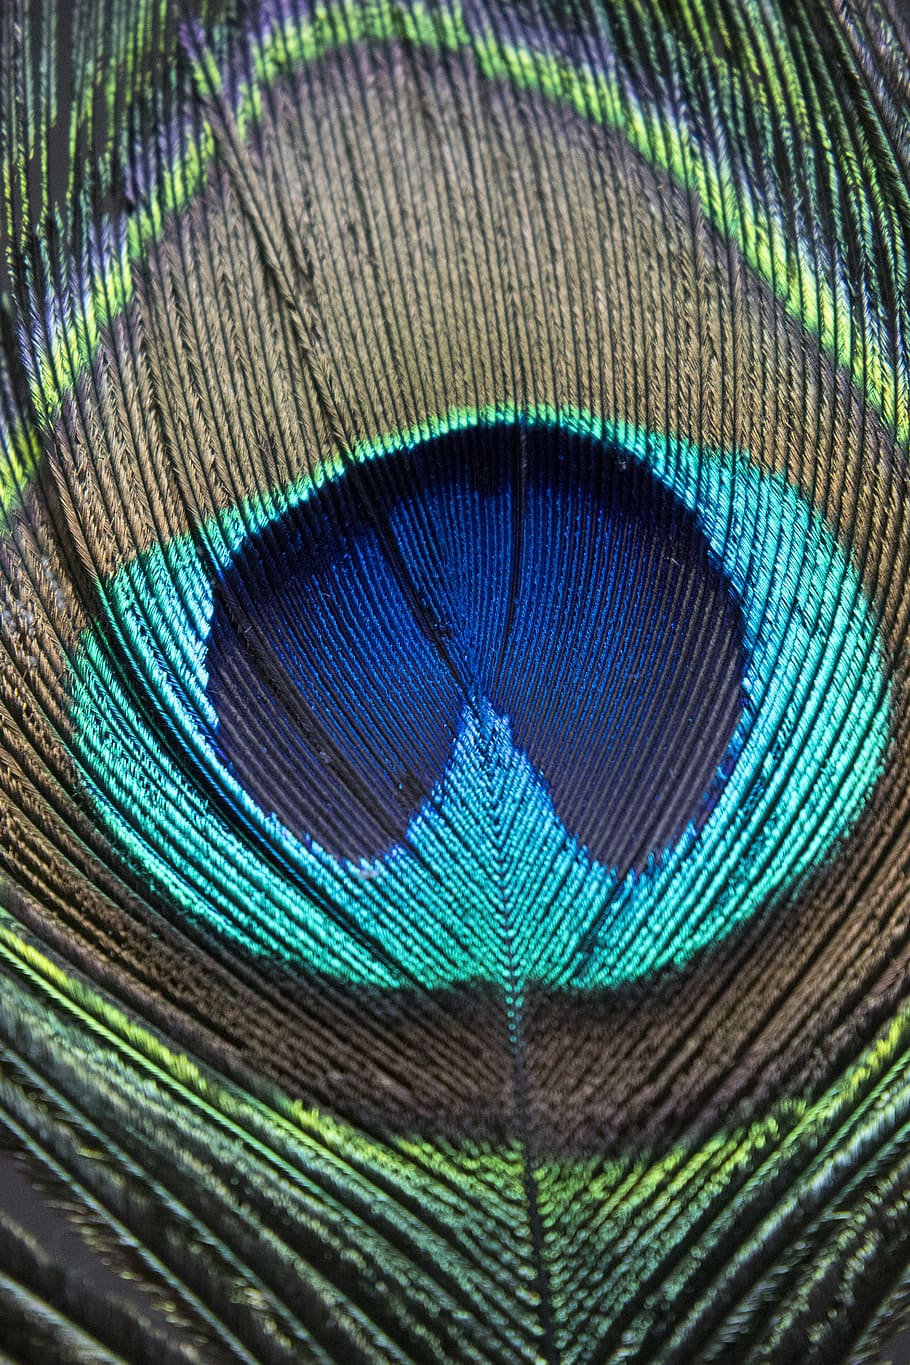 Wallpaper ID: 669030 / beauty in nature, pattern, animal themes, animal  head, plumage, peacock feather, one animal, full frame, peacock, saturated  color, ornate, no people, close-up free download